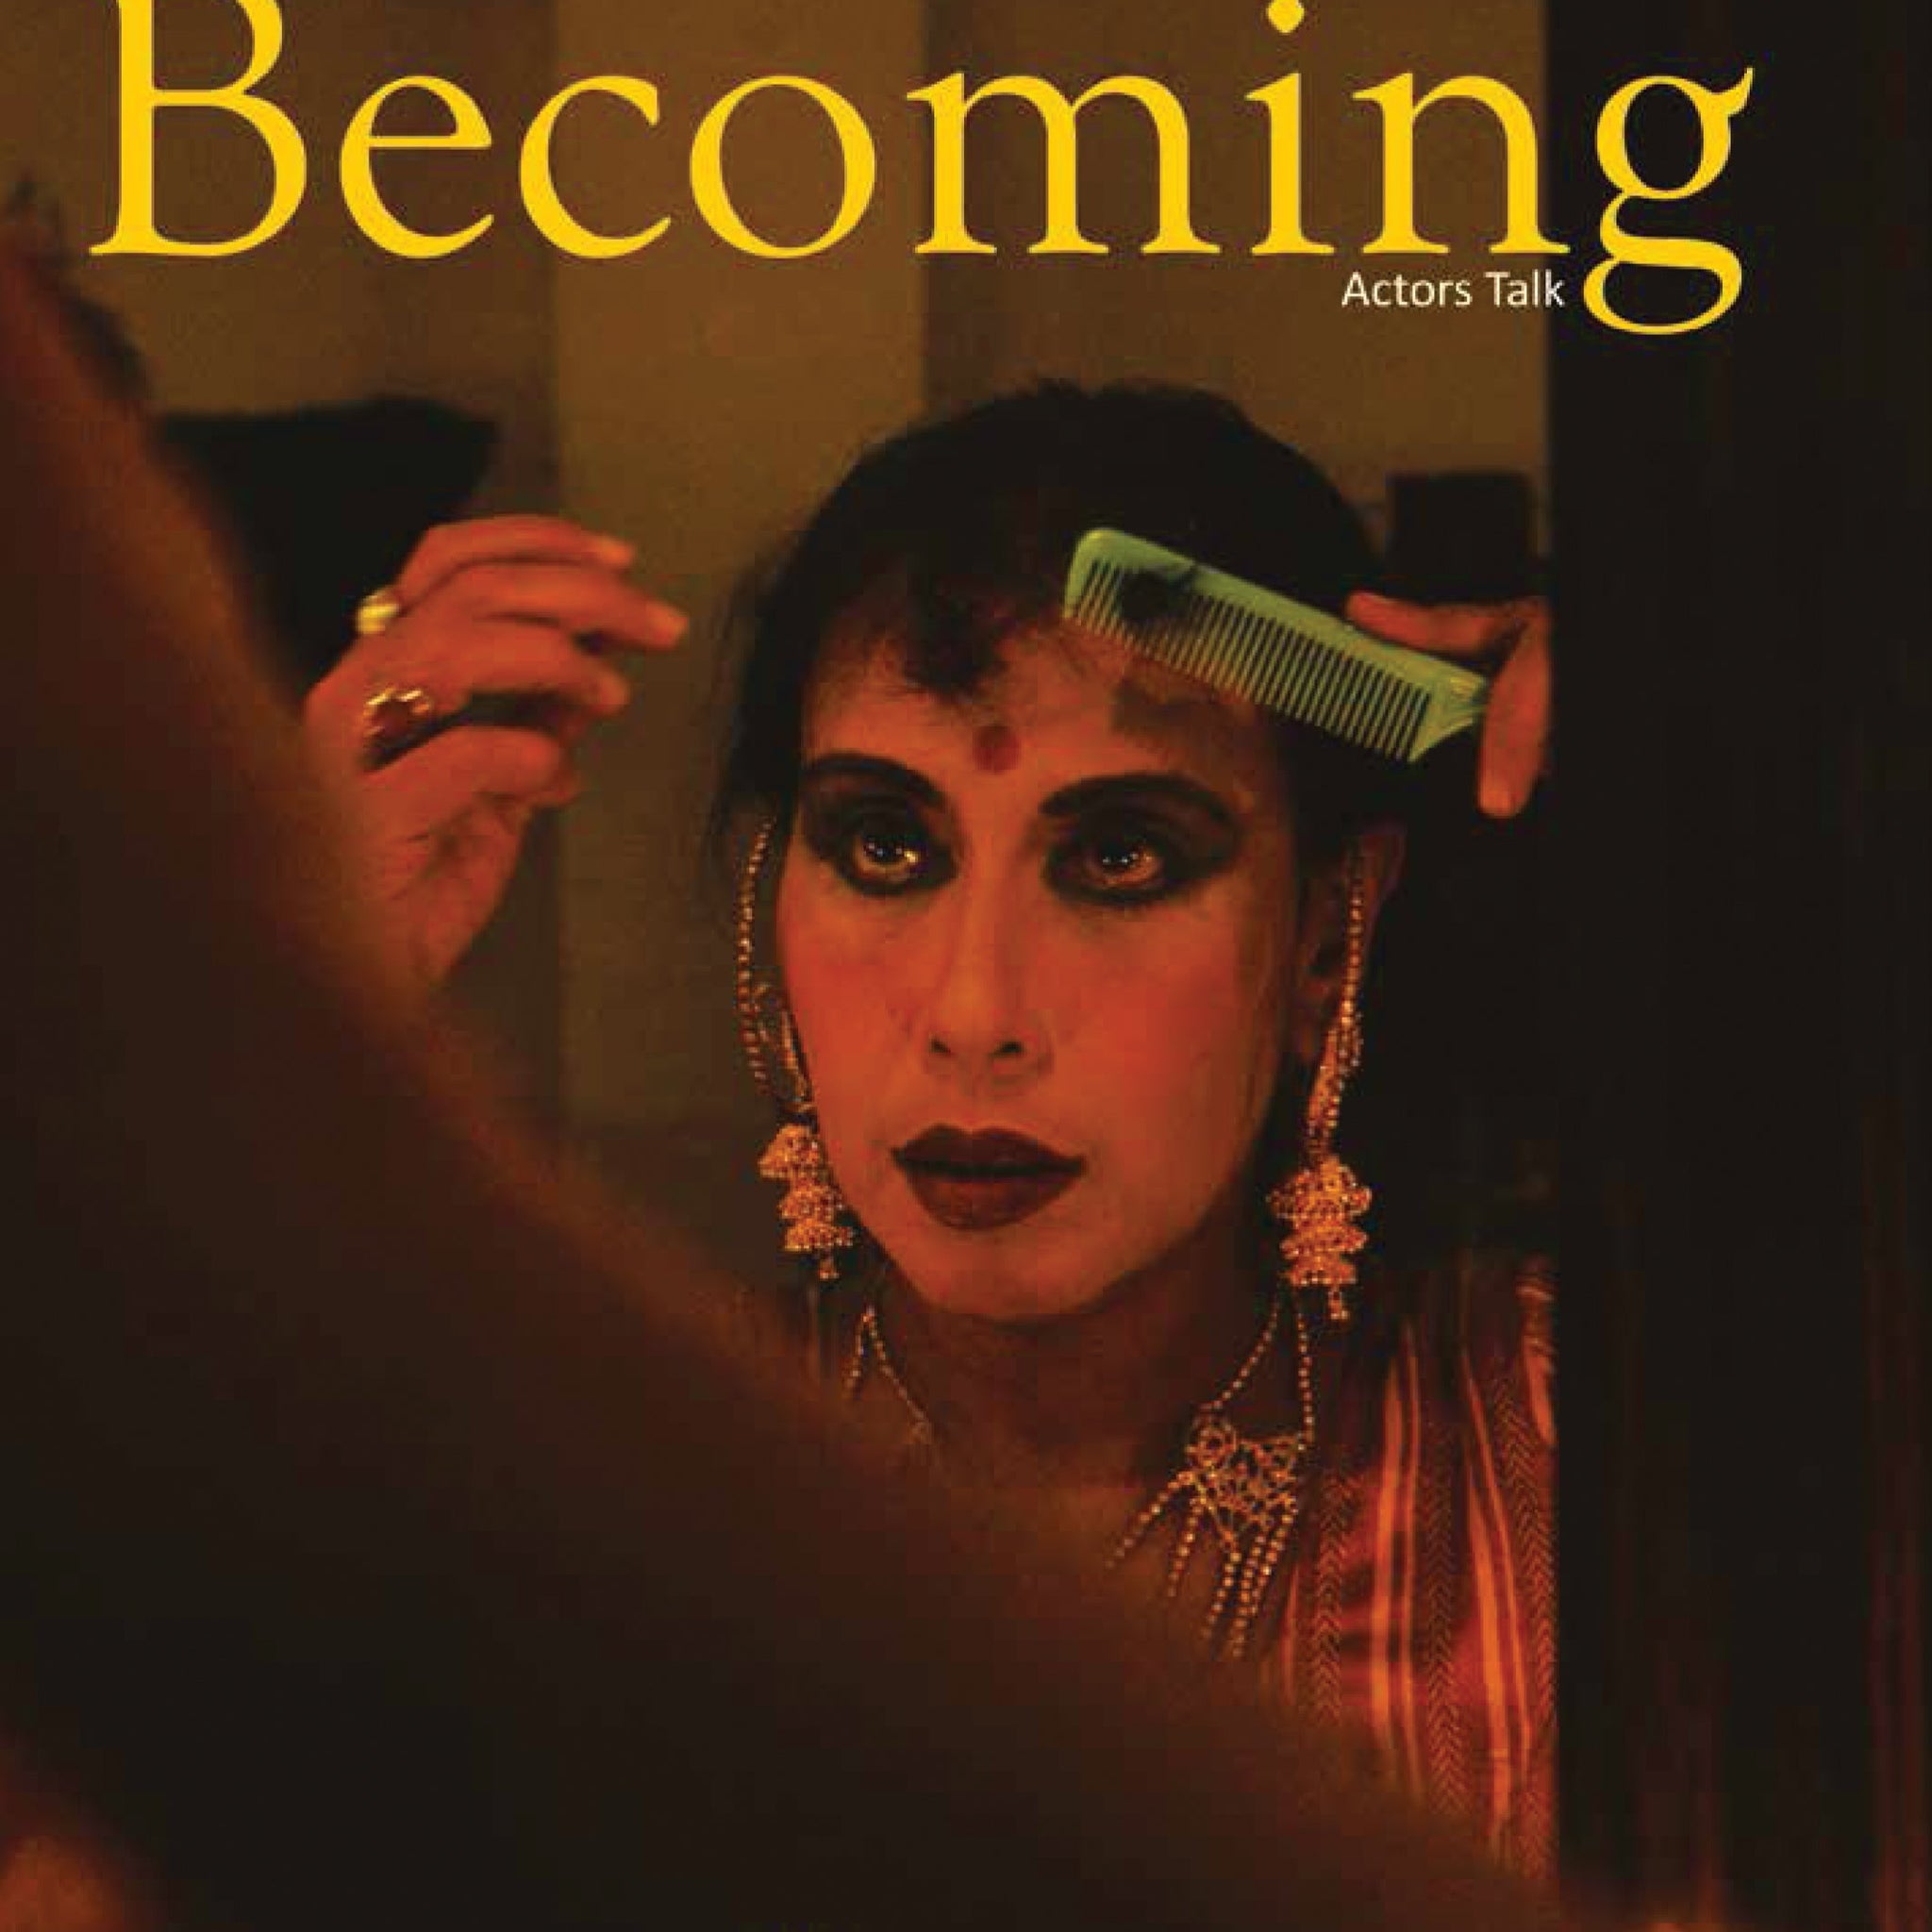 The Act of Becoming: Actor Talk